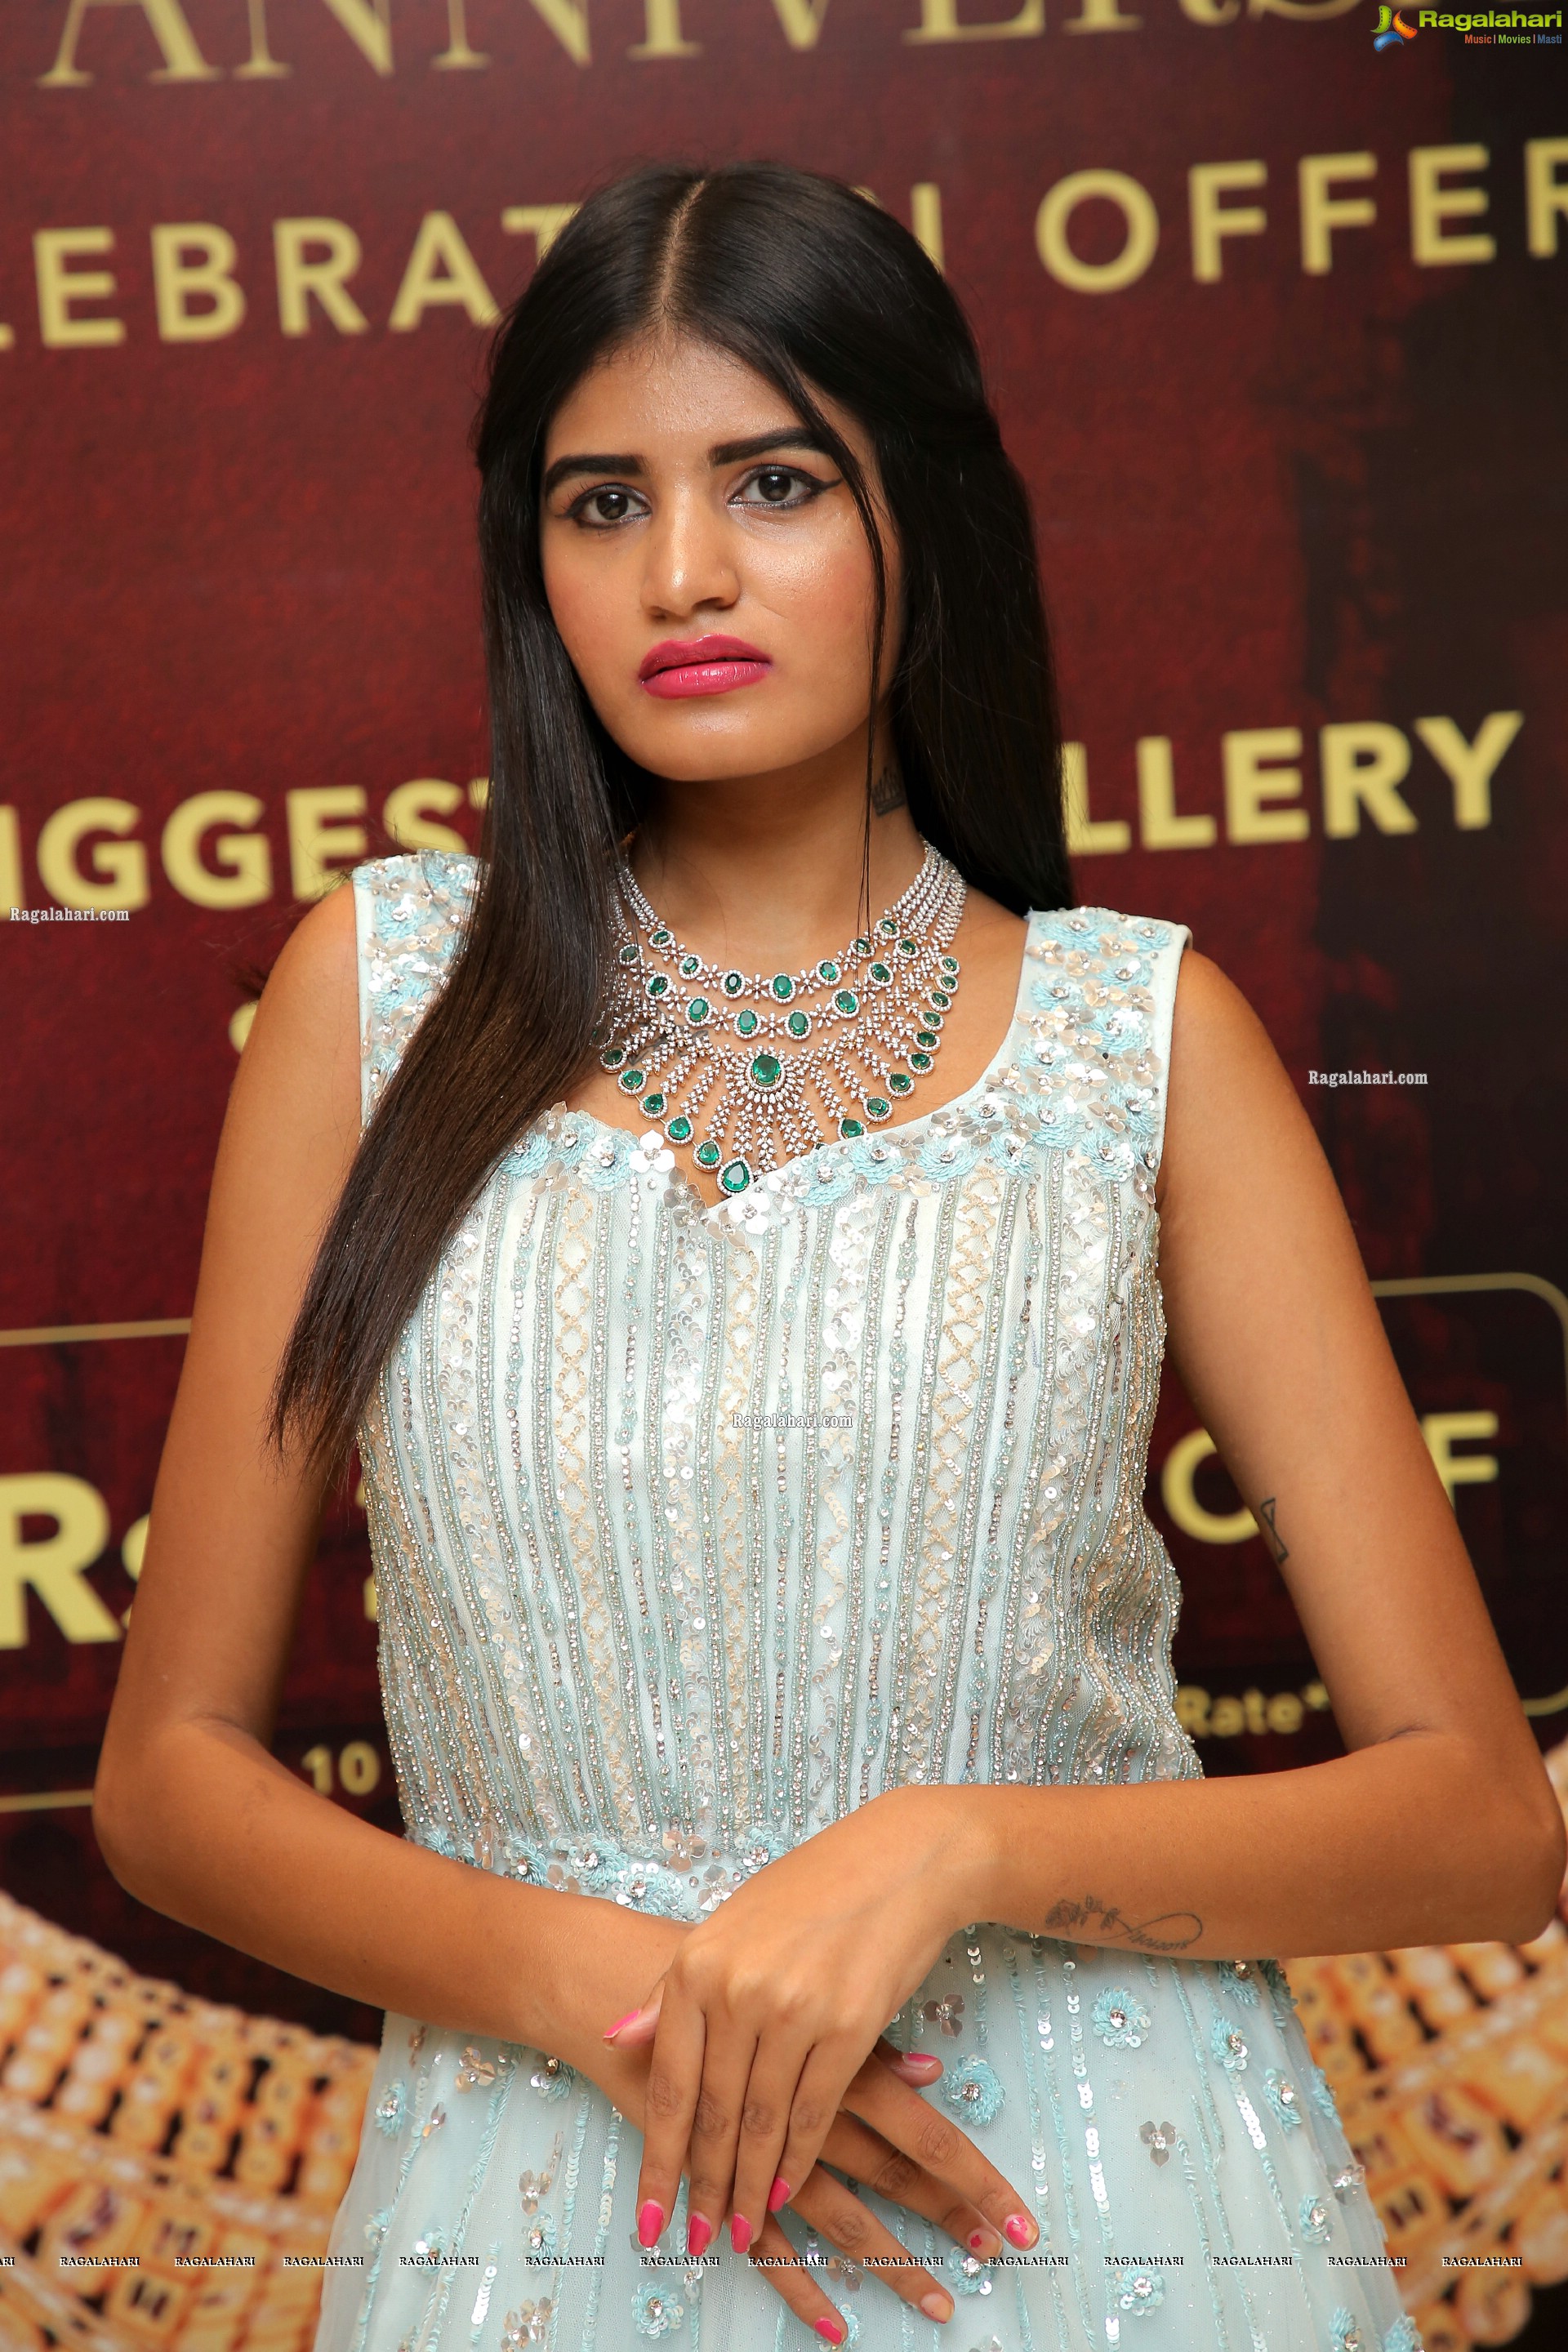 Sindhu Manthri Showcases a Collection of Tibarumal Jewellers' Bridal Jewellery, HD Photo Gallery